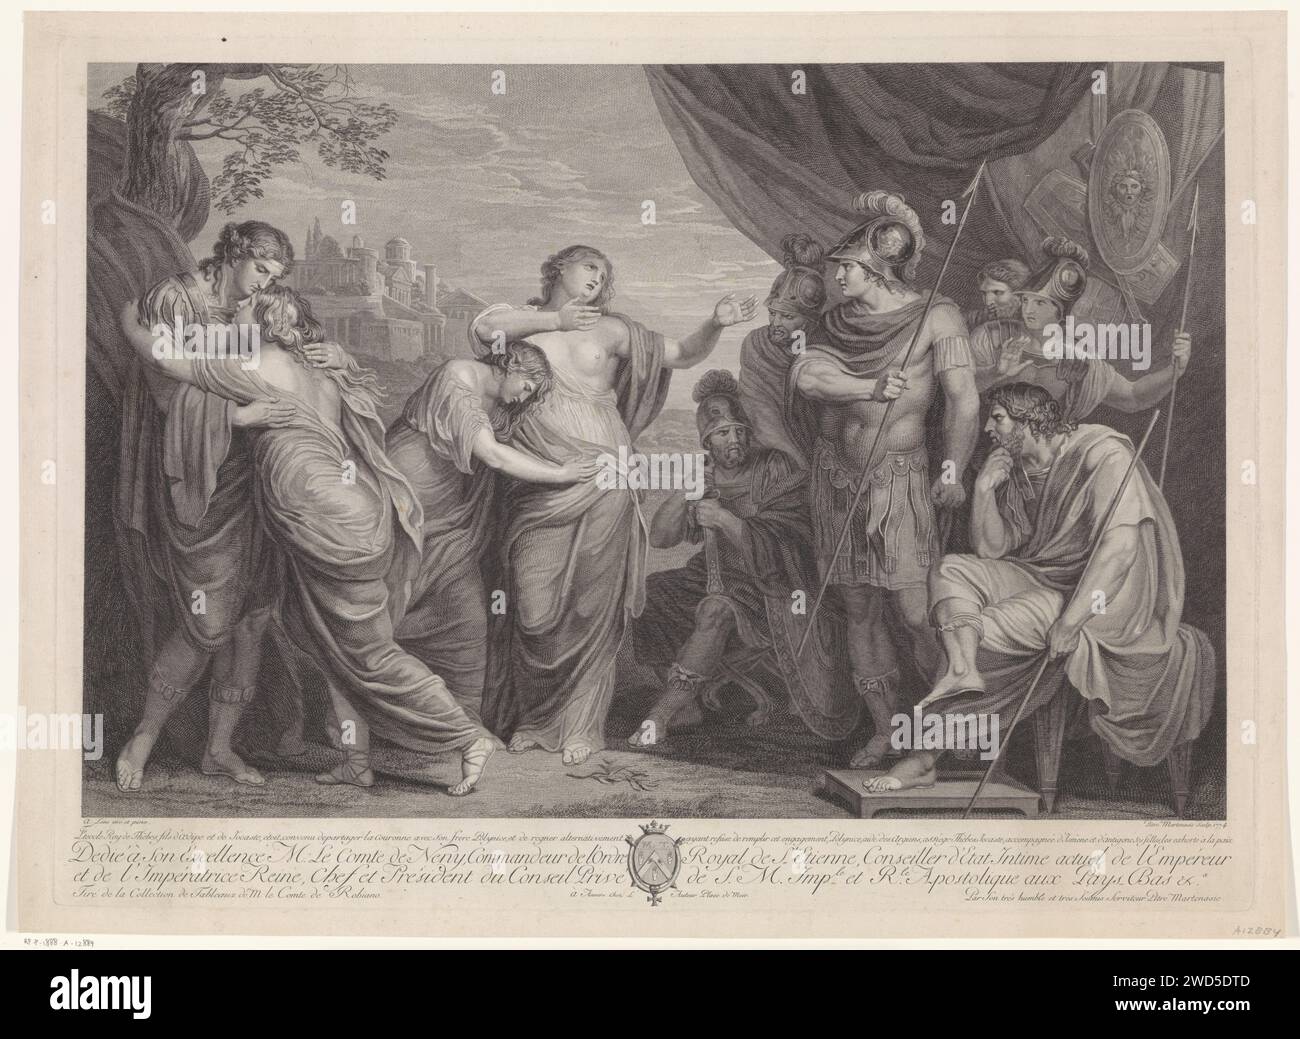 Eteocles and Polynories, admonished by their mother Jocaste to Peace, Pieter Franciscus Martenasie, After Andries Lens, 1774 print Jocaste, spread with the arms, accompanied by her daughters Antigone and Ismene, begs Eteocles and Polynories for peace. On the right Polynes with a helmet on and a spear in the right hand. Left Eteocles. Antwerp paper etching / engraving prelude to the war against Thebes Stock Photo